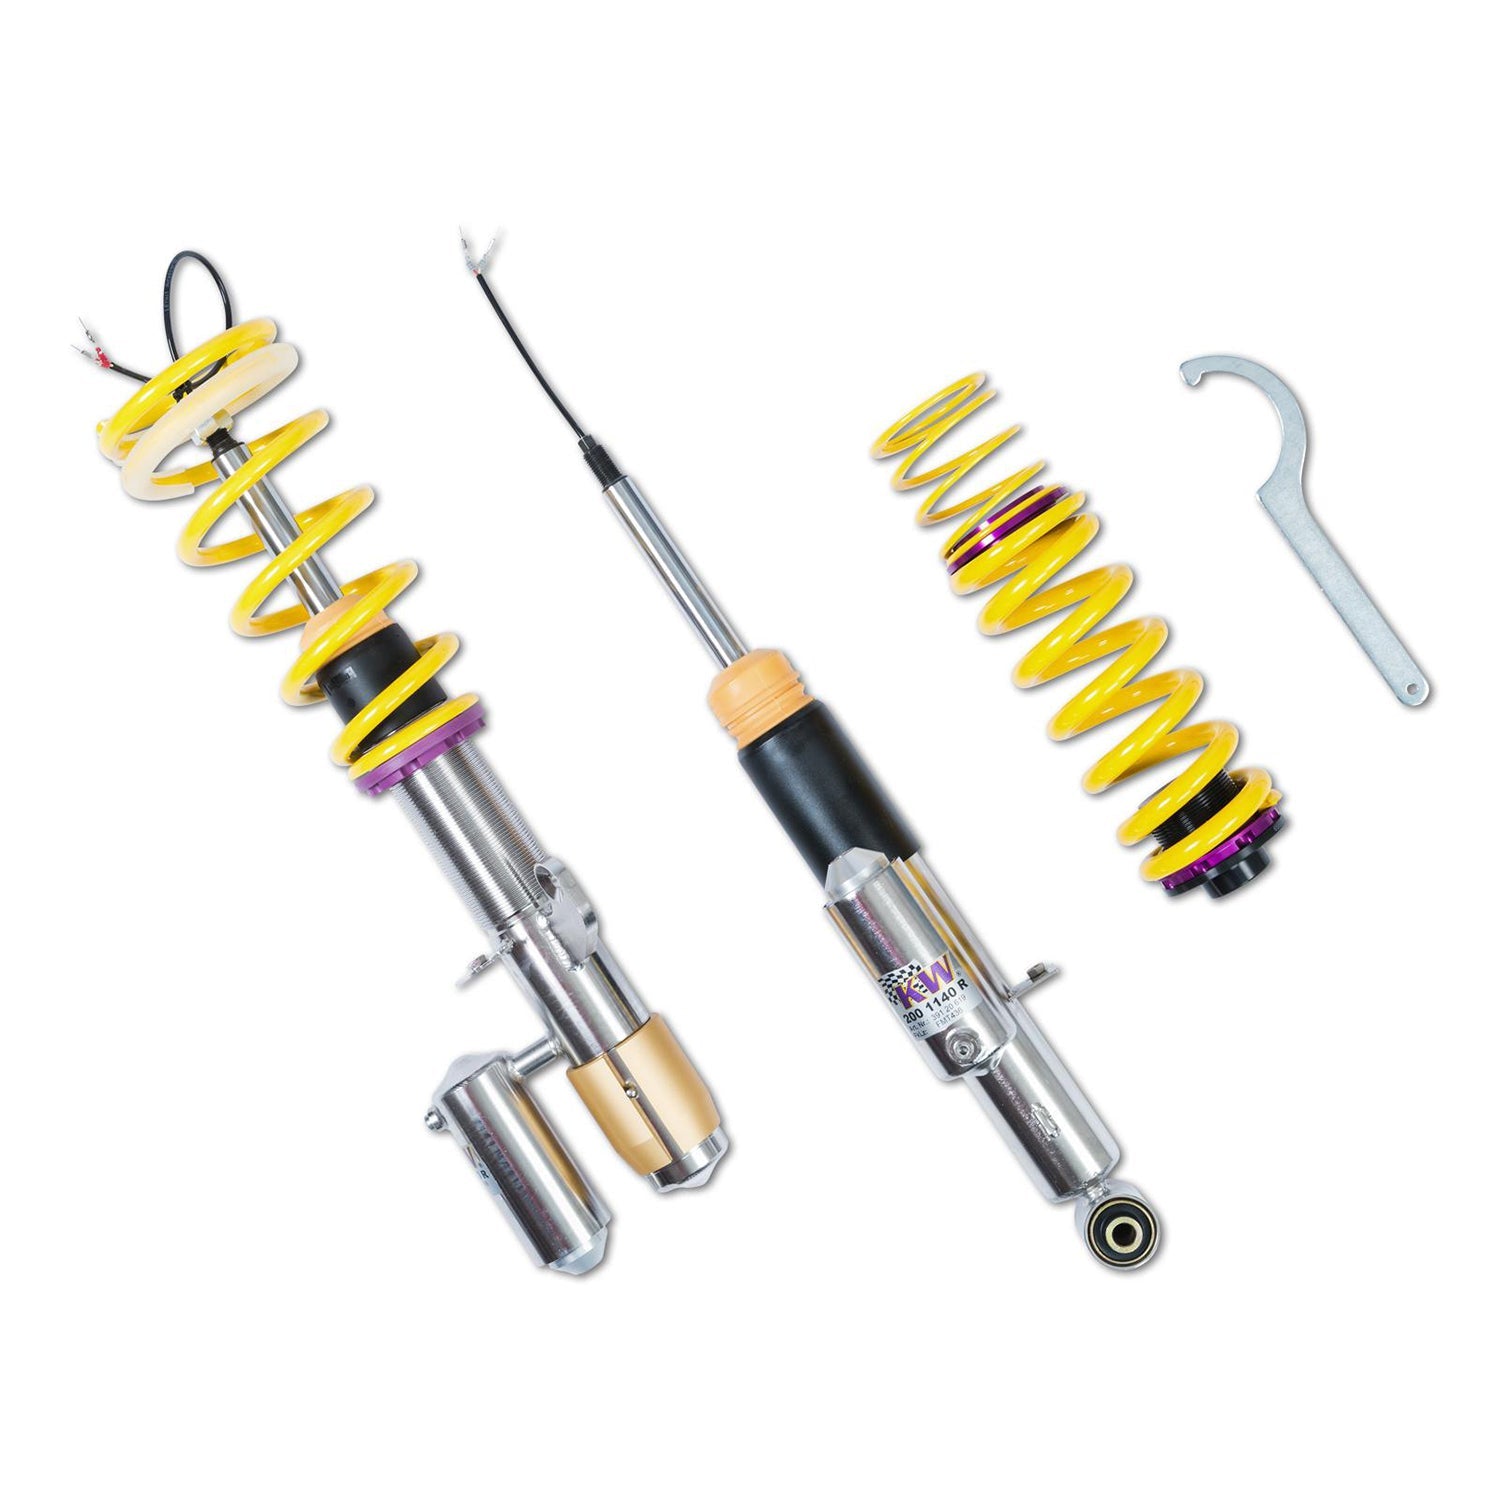 KW BMW M3/M4 DDC Plug & Play Coilover Kit (F80/F82) With EDC-R44 Performance